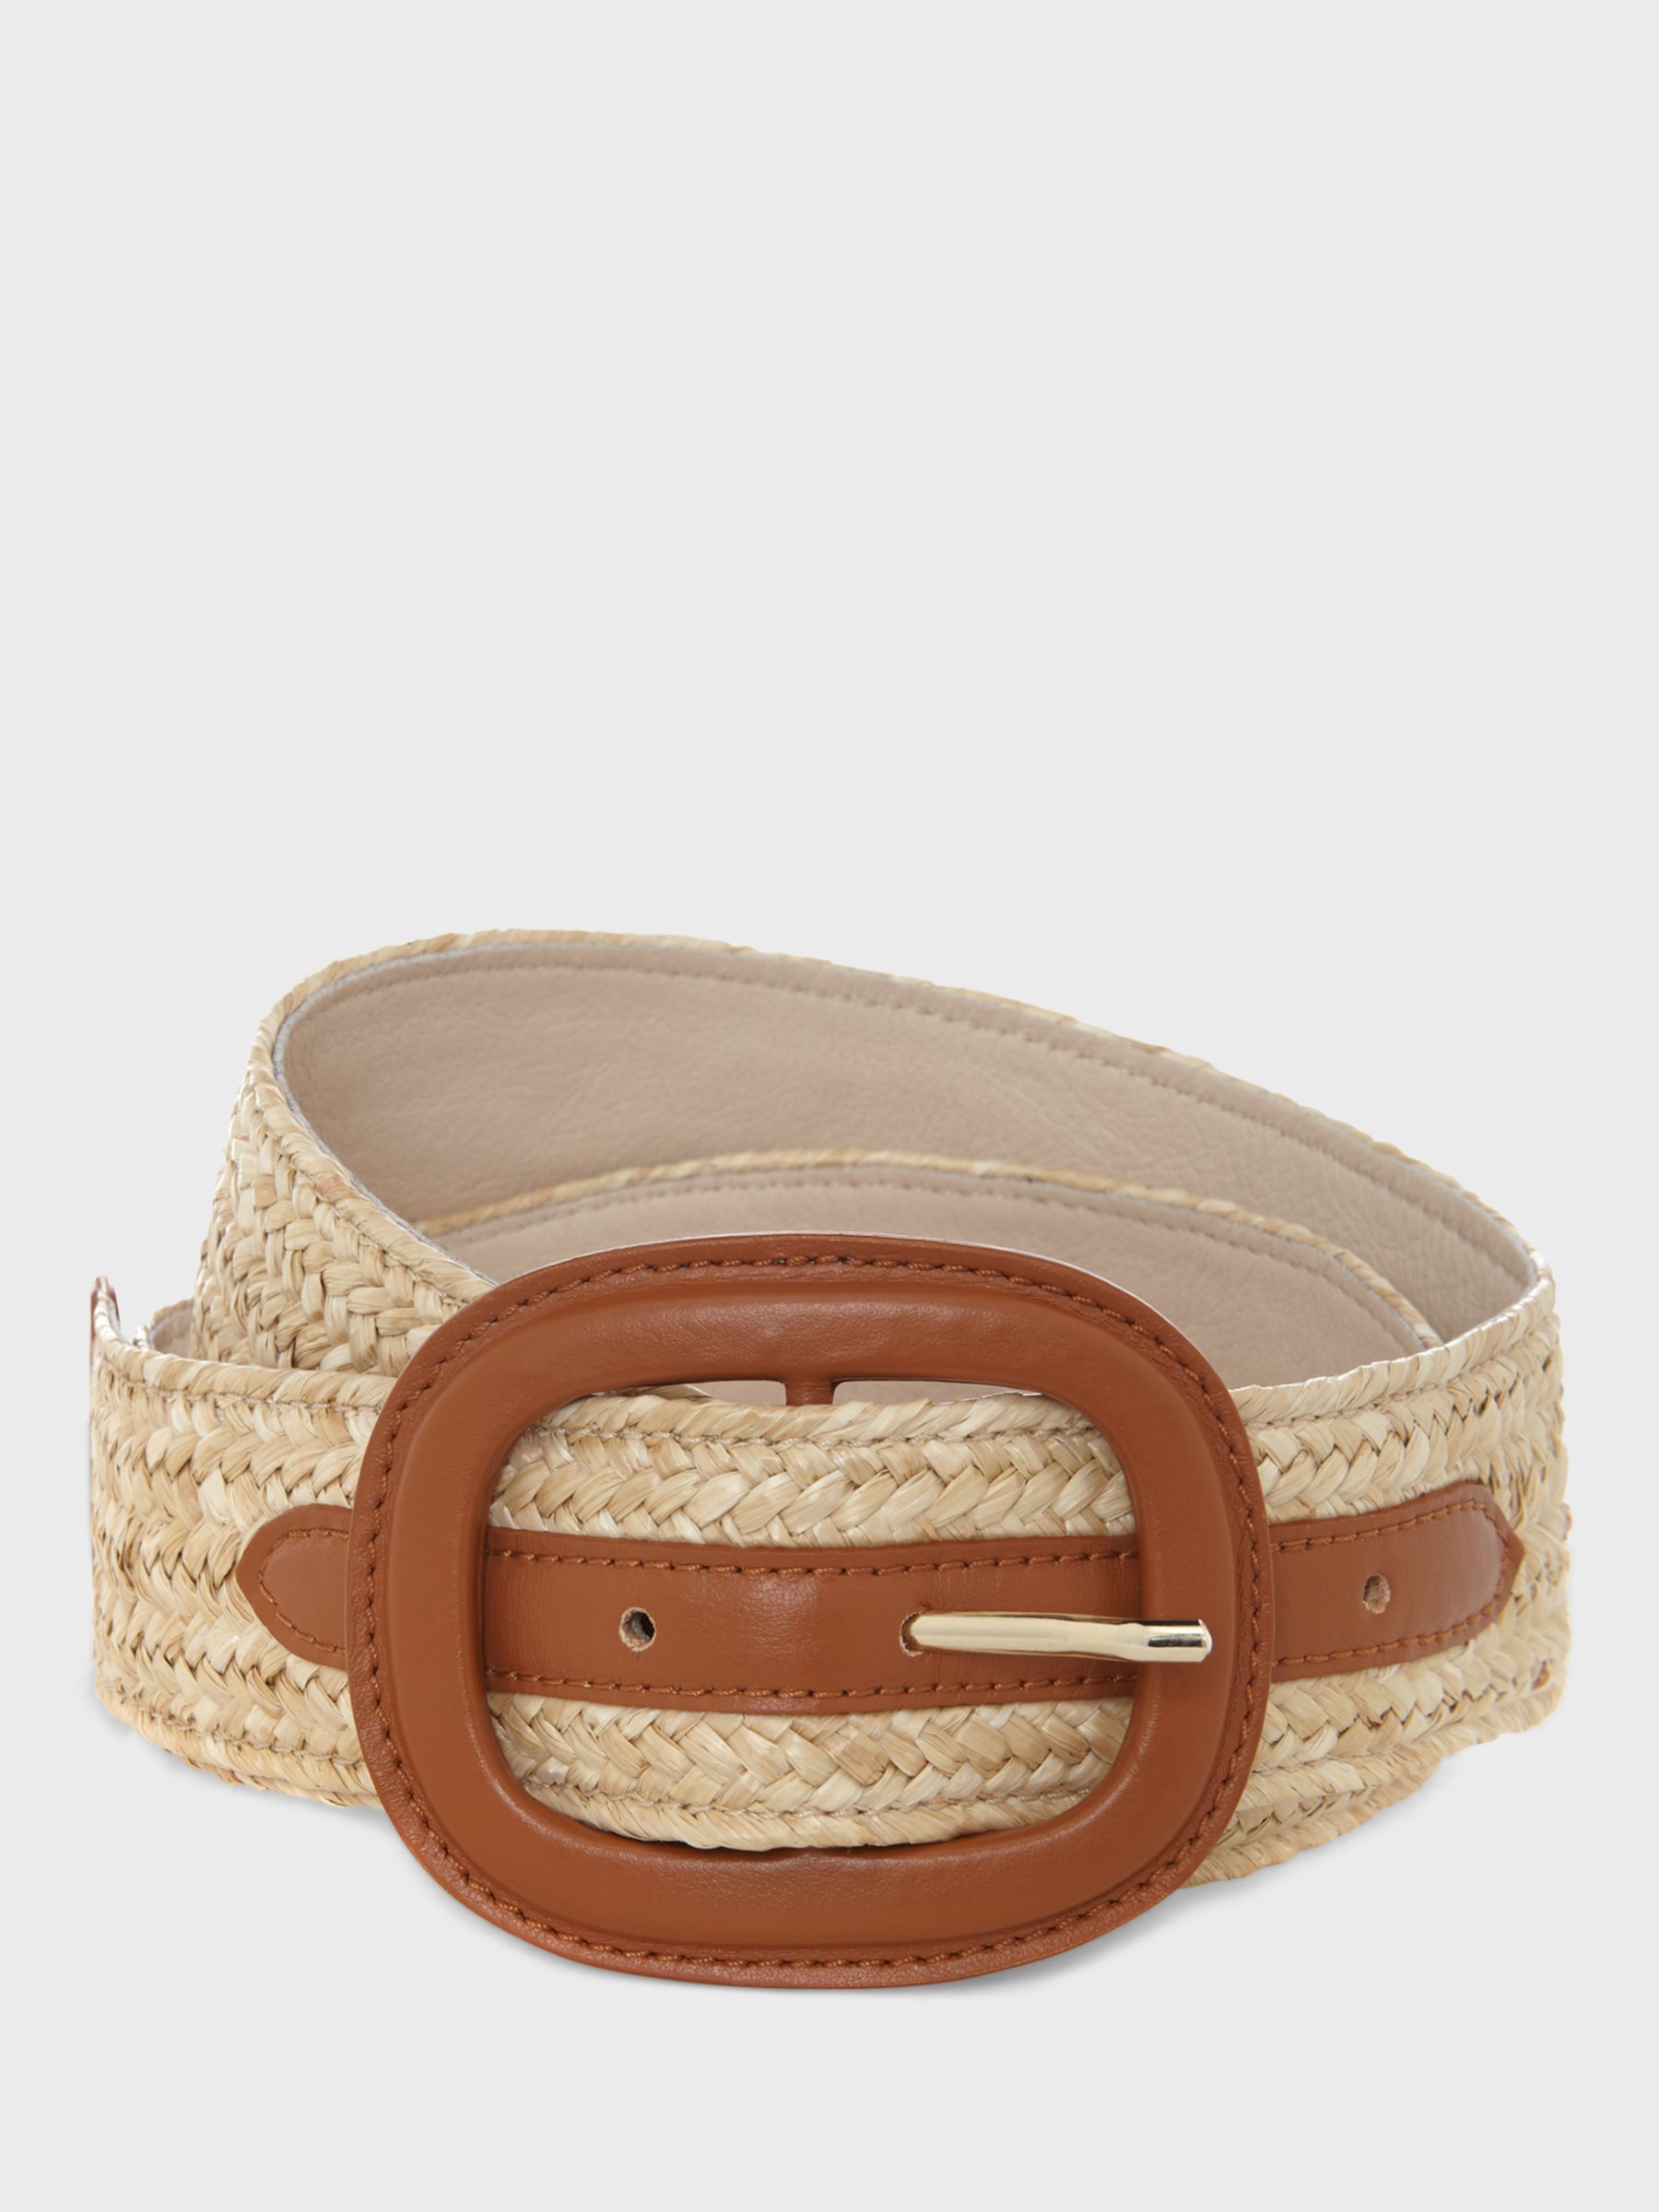 Hobbs Abbie Straw and Leather Belt, Natural/Tan, S